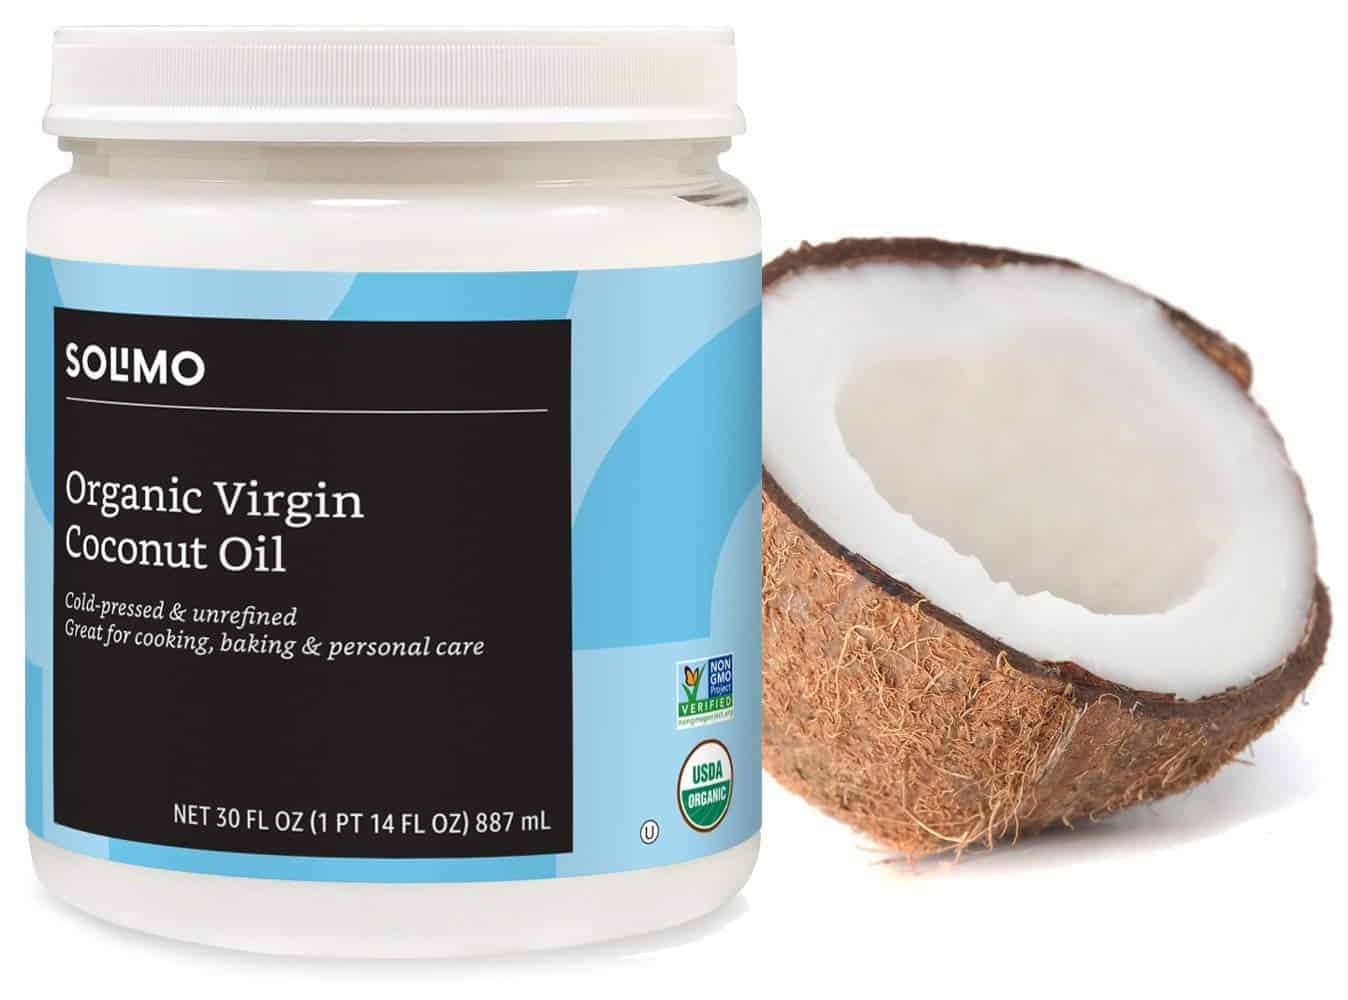 Amazon: Solimo Organic Virgin Coconut Oil (30 oz) as low as ONLY $5.99 Shipped!